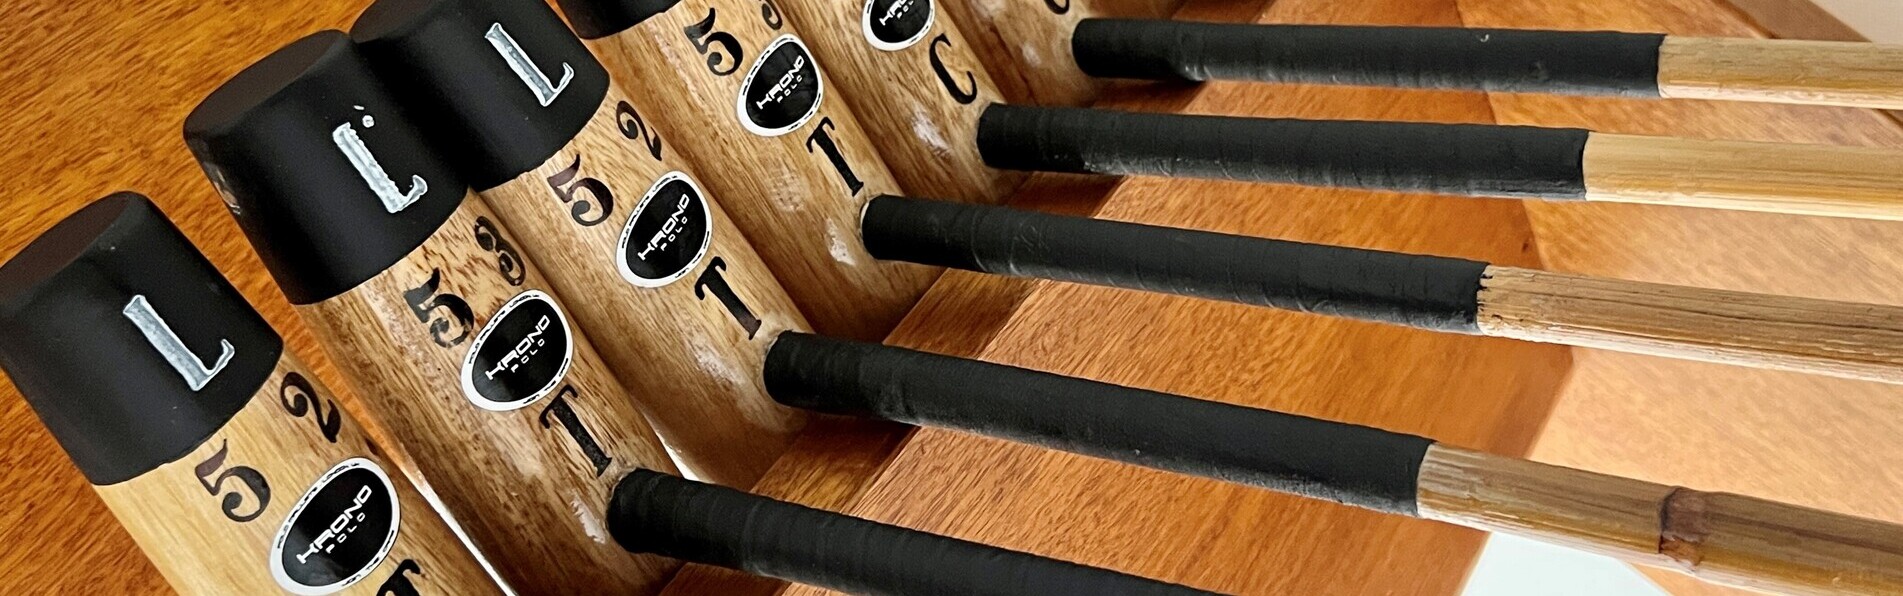 https://www.kronopolo.es/image/cache/catalog/Blog%20Banners/Polo%20Mallets-1903x596.jpg